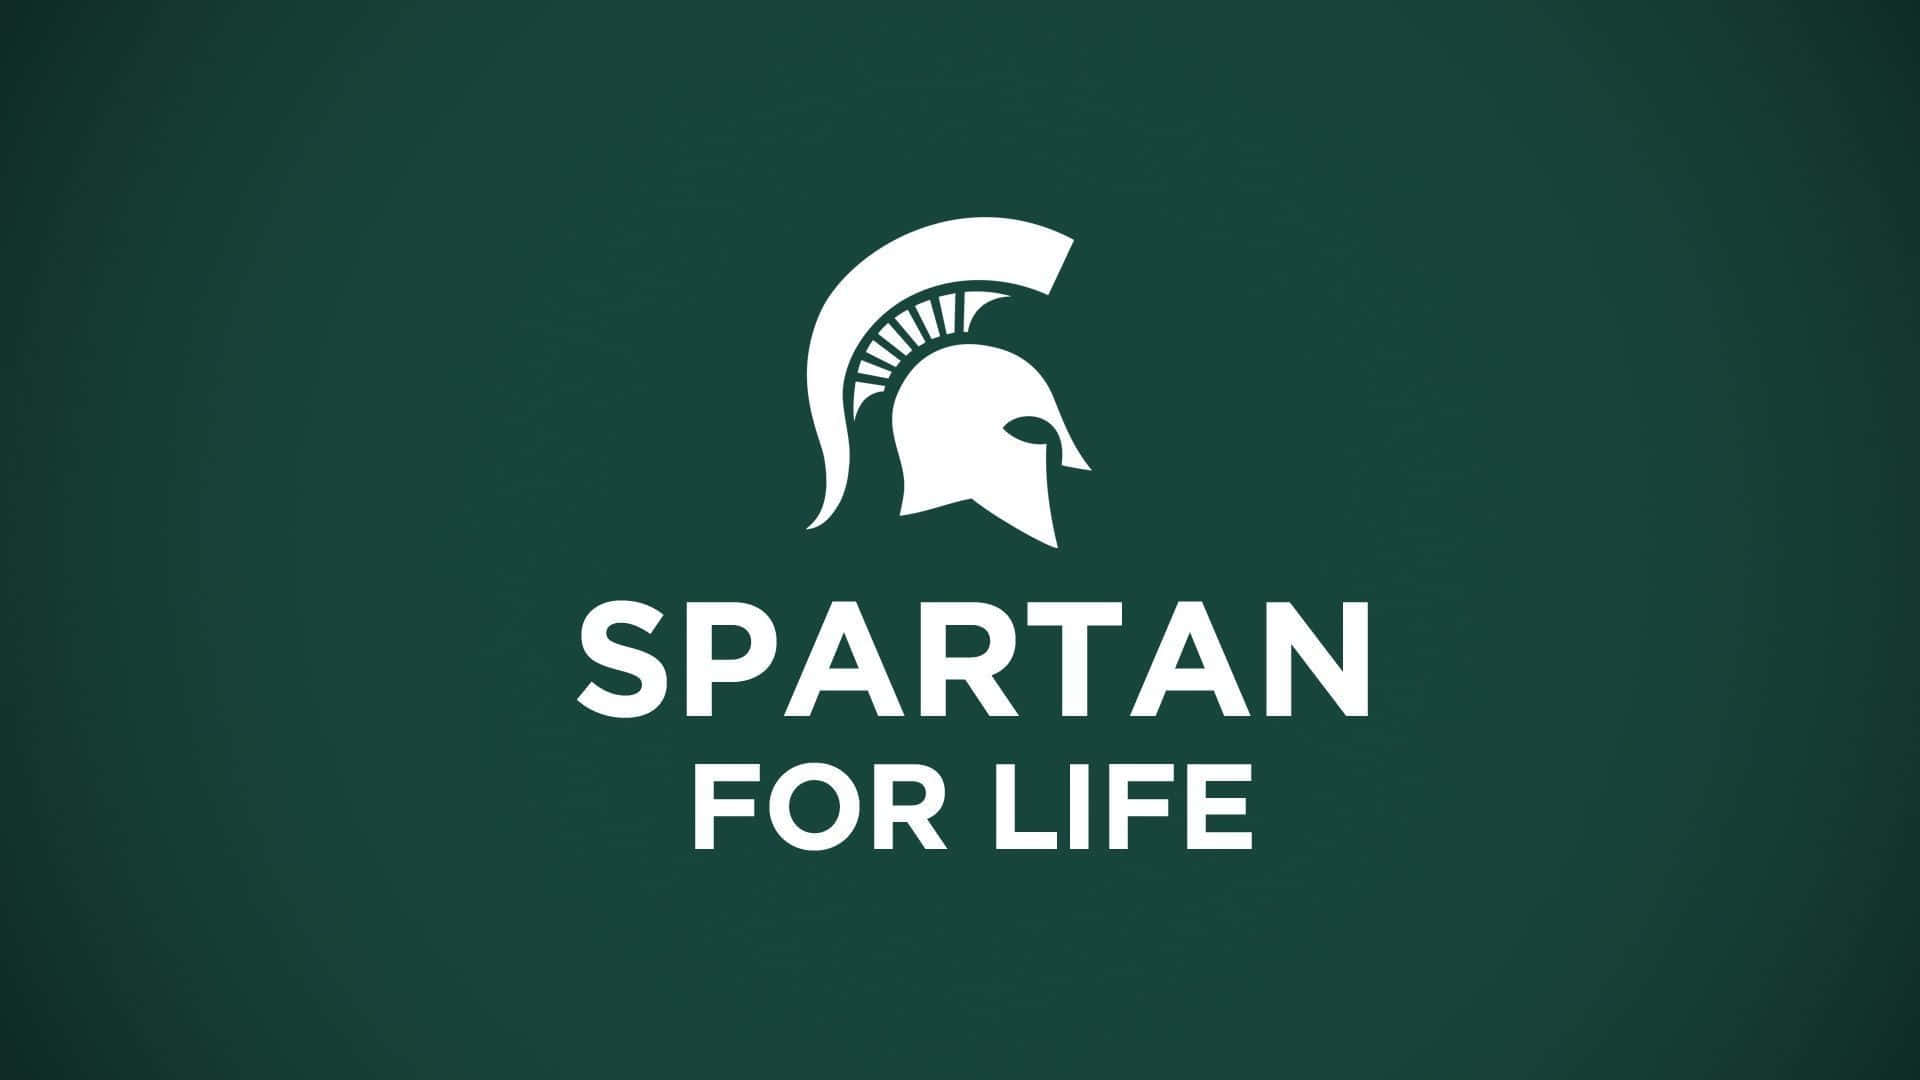 Michigan State Spartans For Life Background